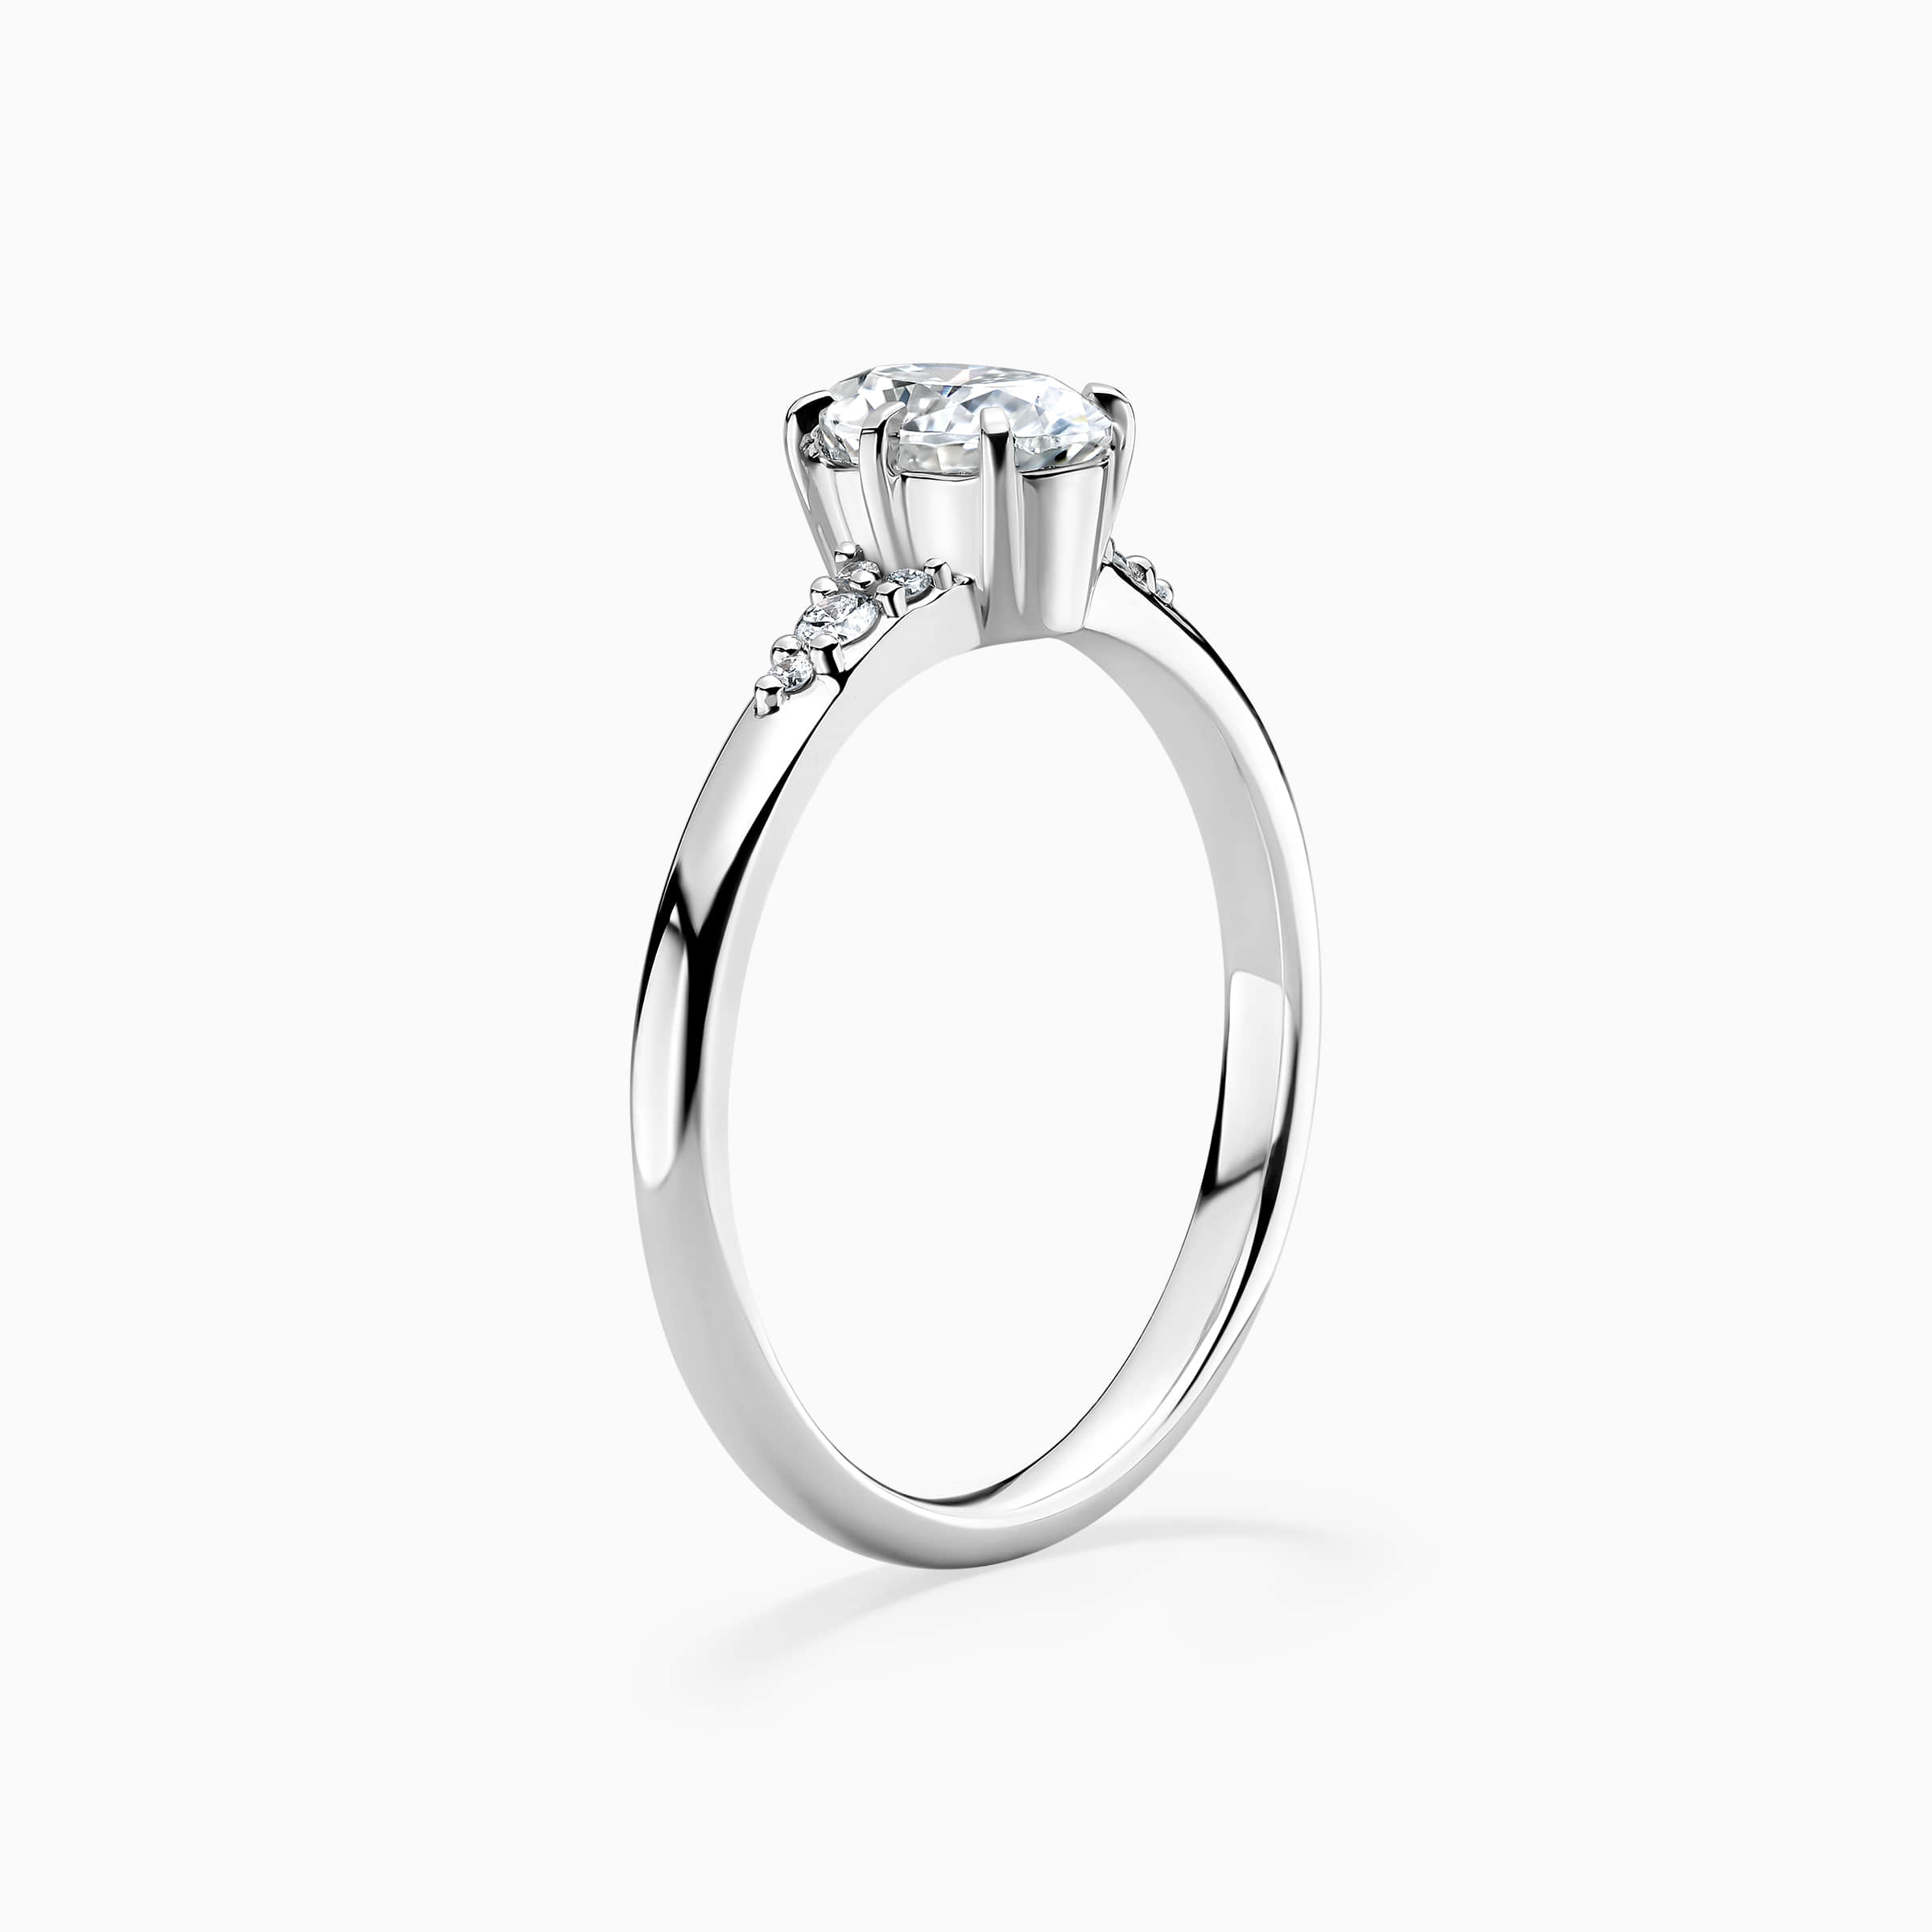 Darry Ring oval engagement ring side view